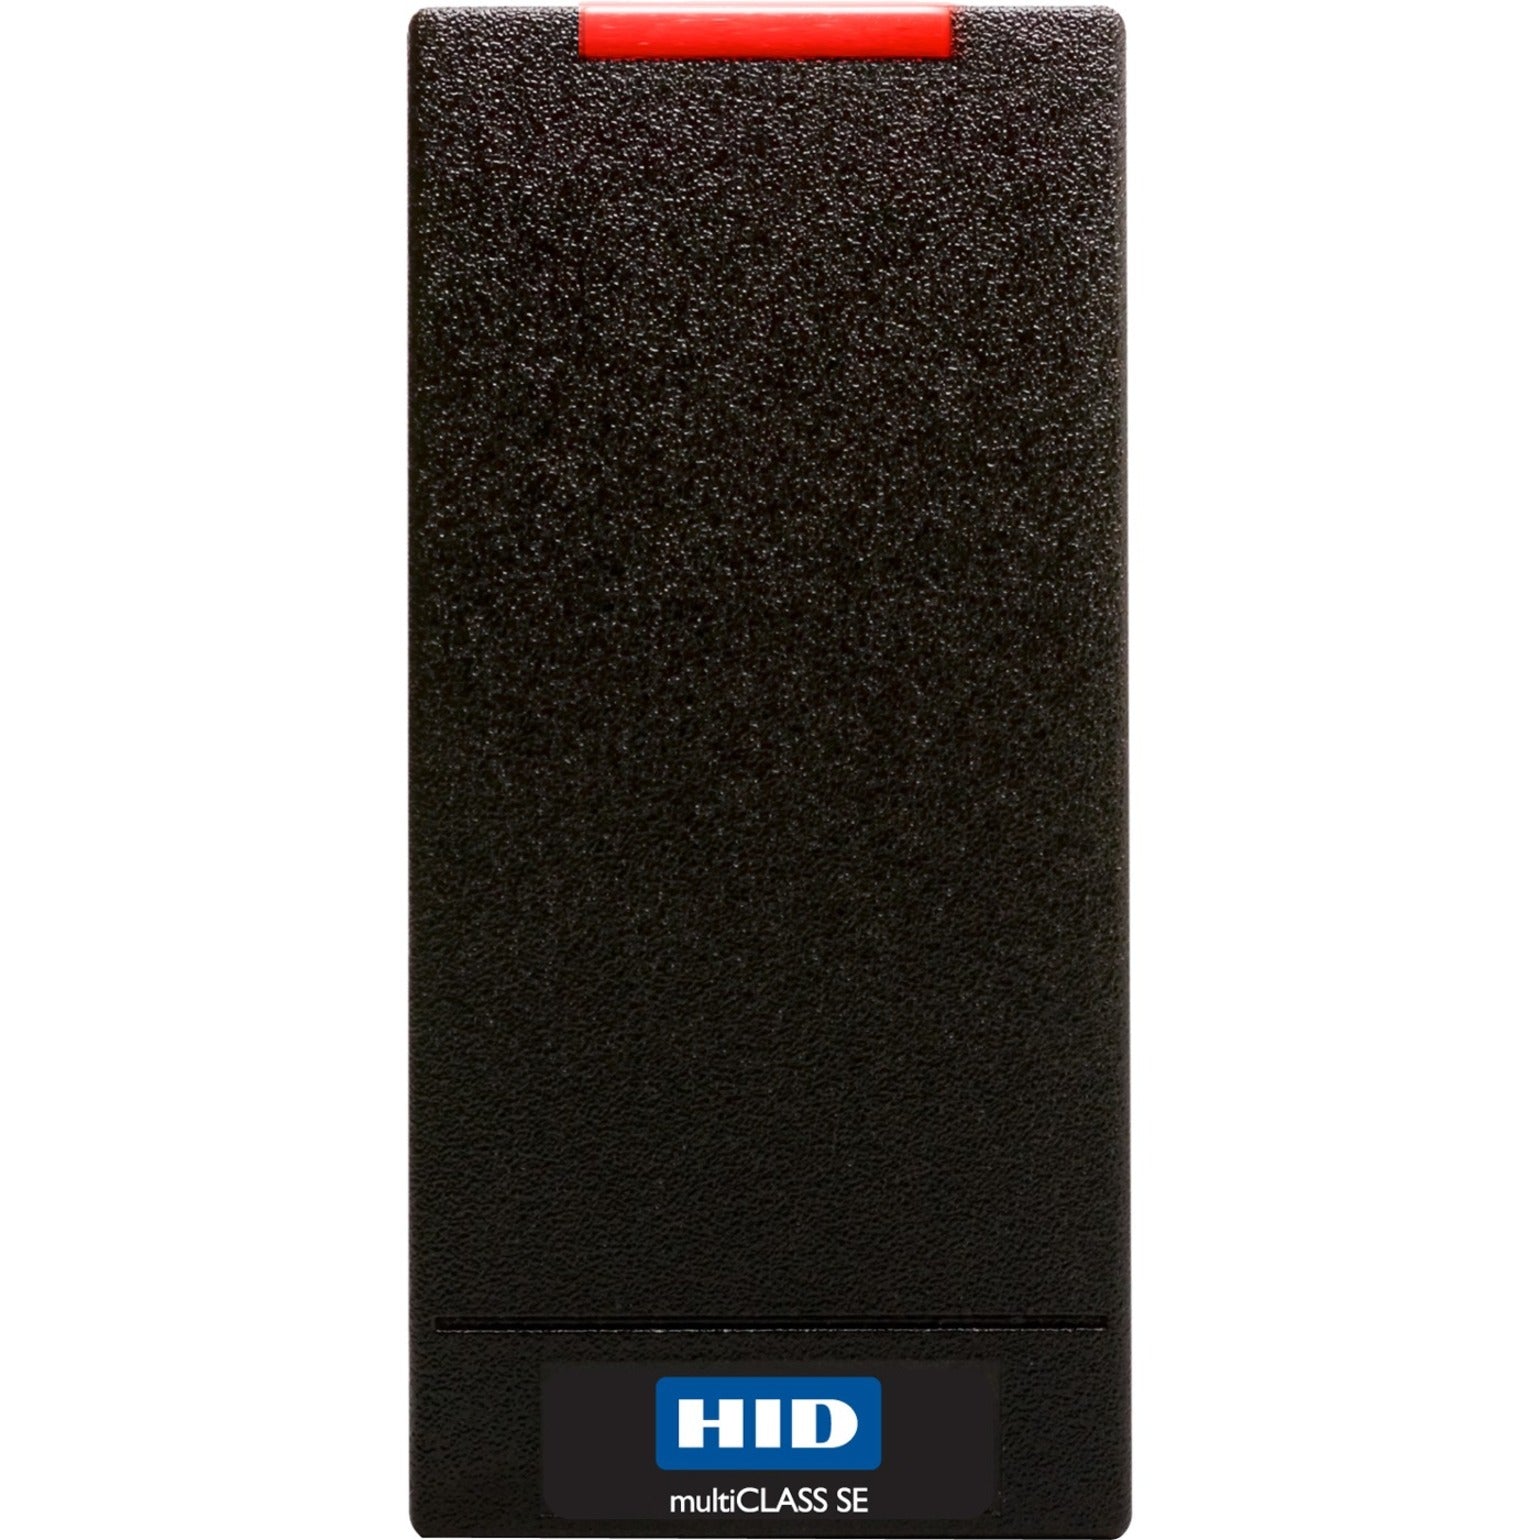 HID 900PTNNEK00000 multiCLASS SE RP10 Multi-technology Smartcard Reader, Multi-Layered Security, Contactless, Cable Connectivity